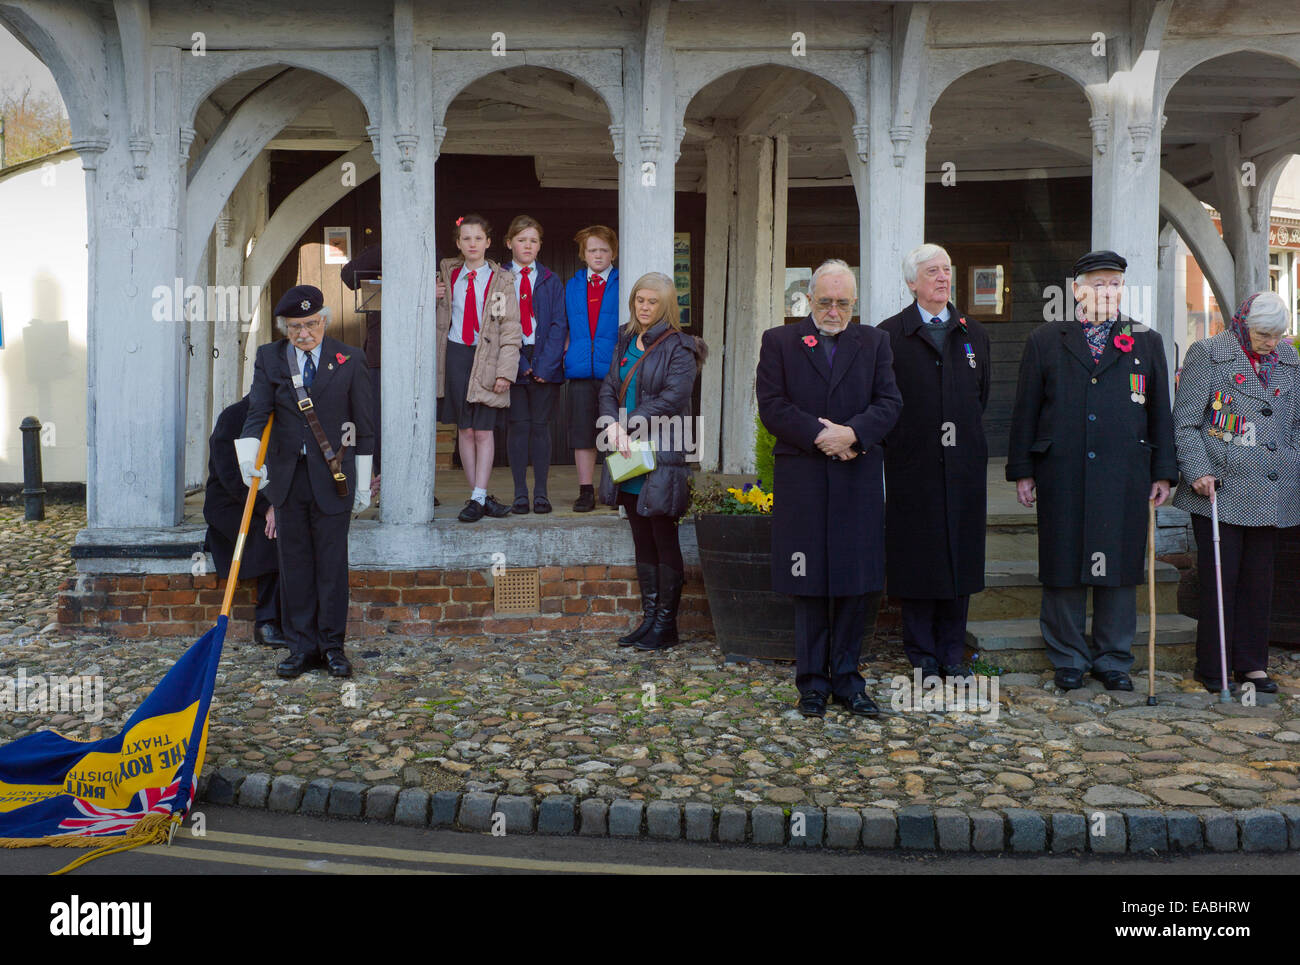 Thaxted, Essex, UK. Remembrance day 11 November 2014. The men, women and children of Thaxted a small town in north Essex remember the fallen from both WWI and WWII as well as those who have died in more recent conflicts seen here outside the 14th cent. Guildhall. Credit:  BRIAN HARRIS/Alamy Live News Stock Photo